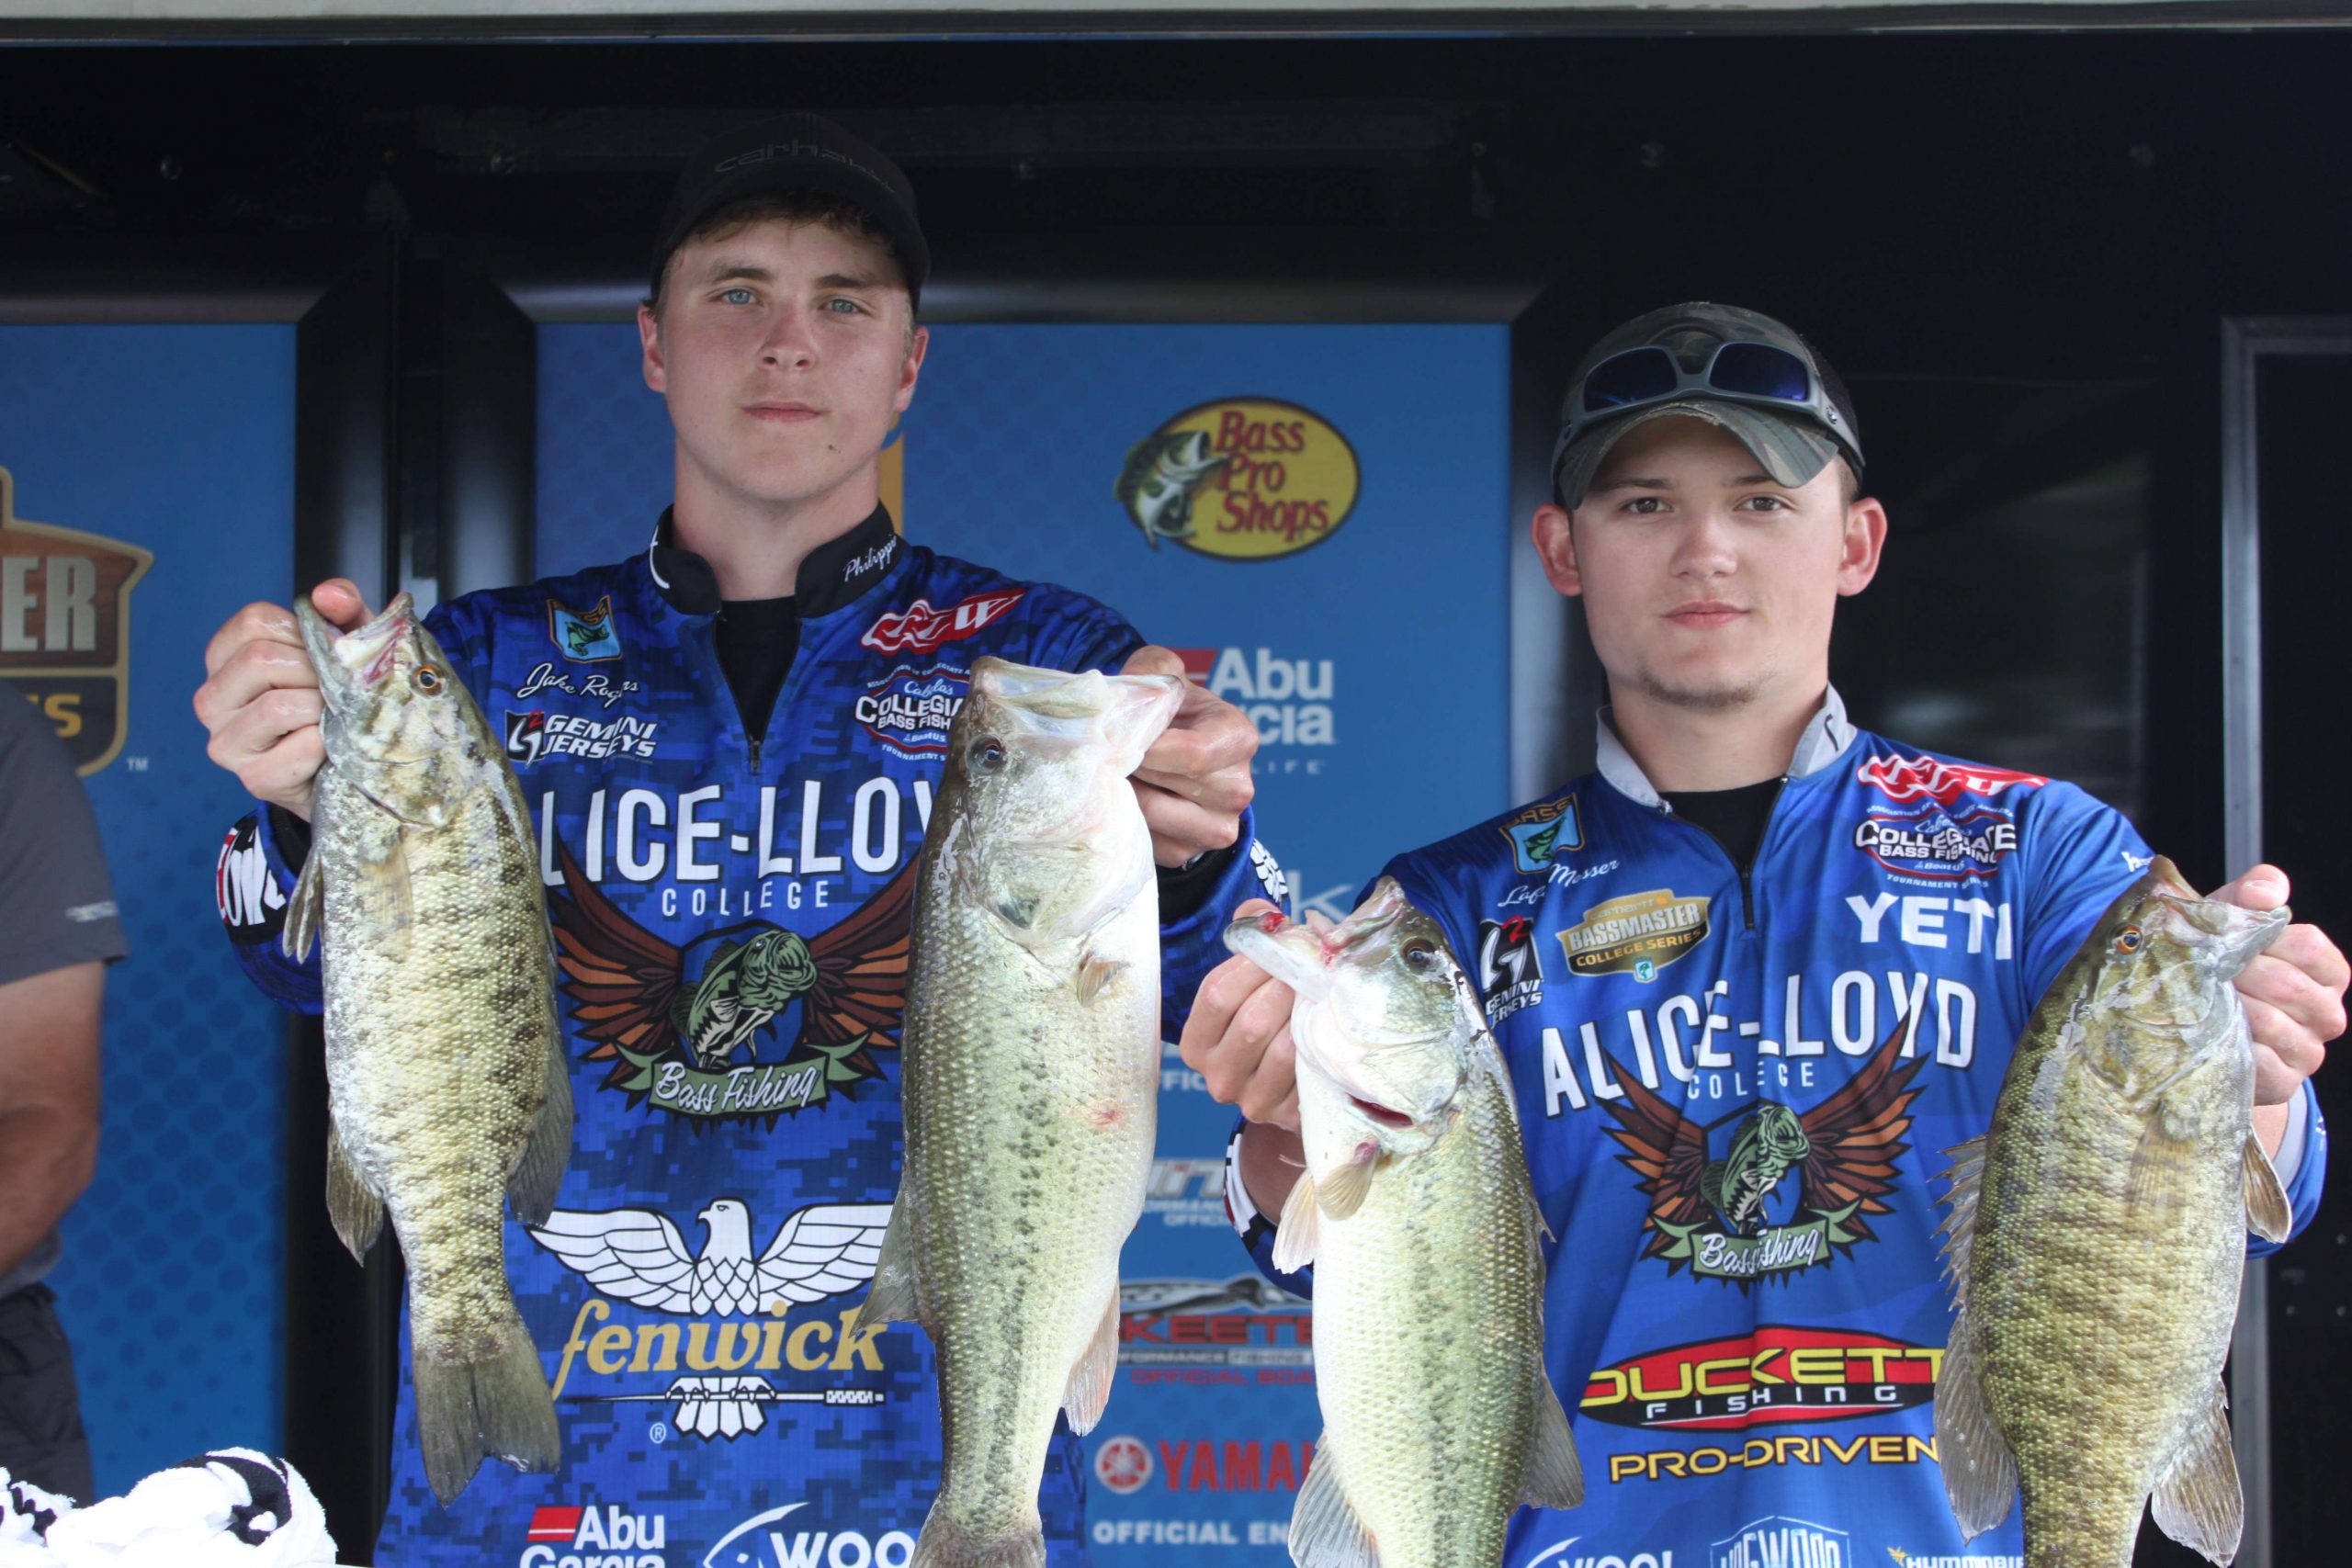 Jake Rogers and Lafe Messer of Alice Lloyd College also came in with a 12-14 limit.